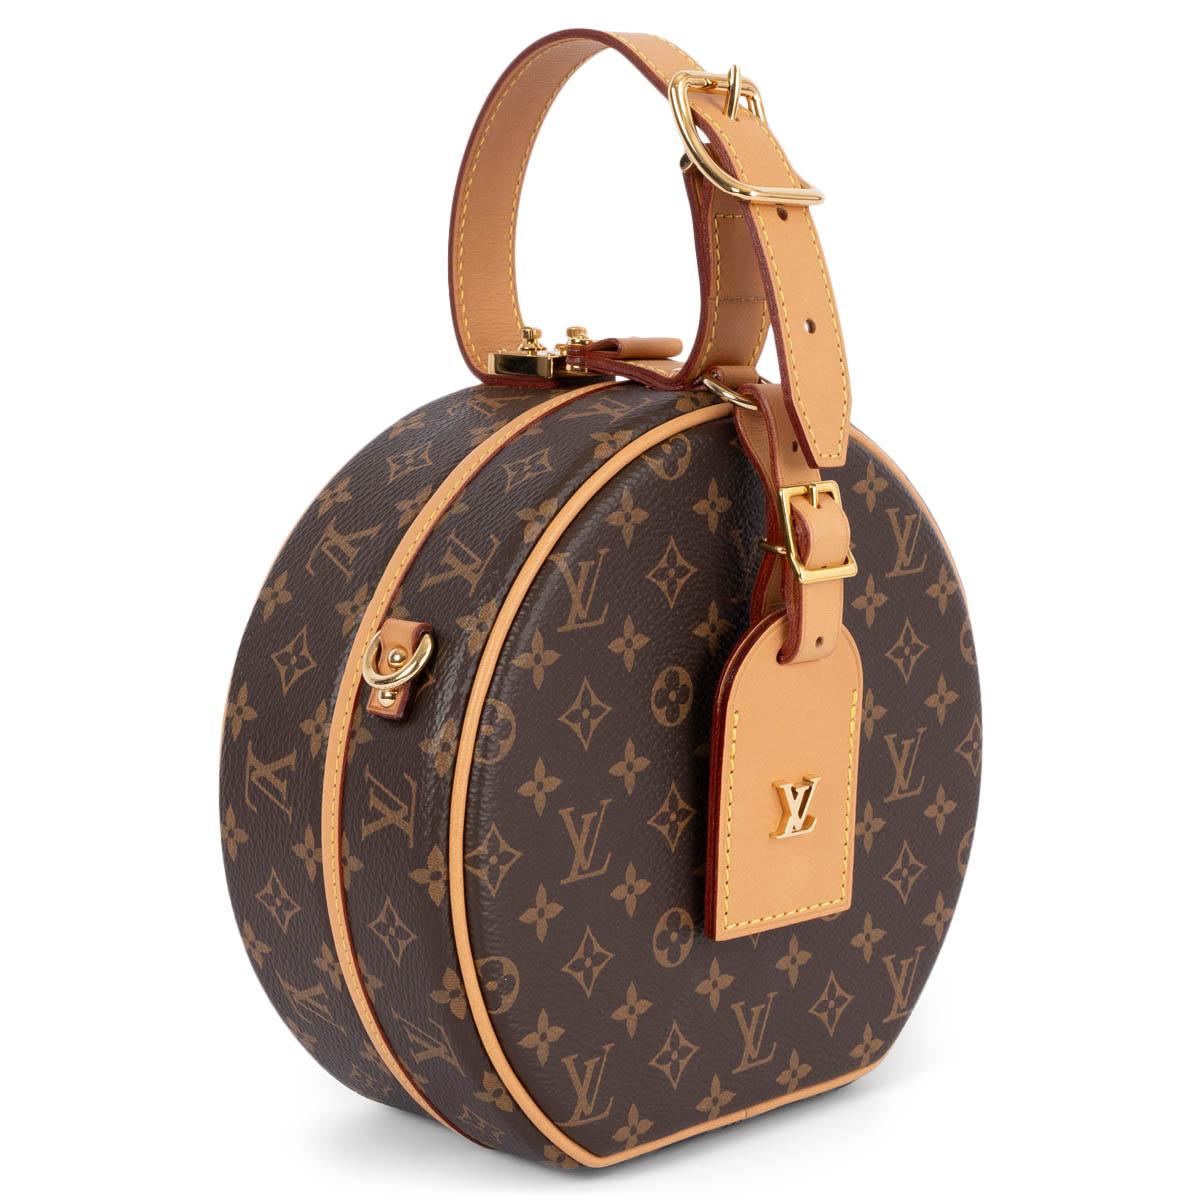 100% authentic Louis Vuitton Petite Boîte Chapeau iconic hatbox is reimagined as an adorable day-to-evening bag. Small yet practical, this exclusive piece comes in classic coated Monogram canvas with cowhide trim. Lined in cream lambskin with one